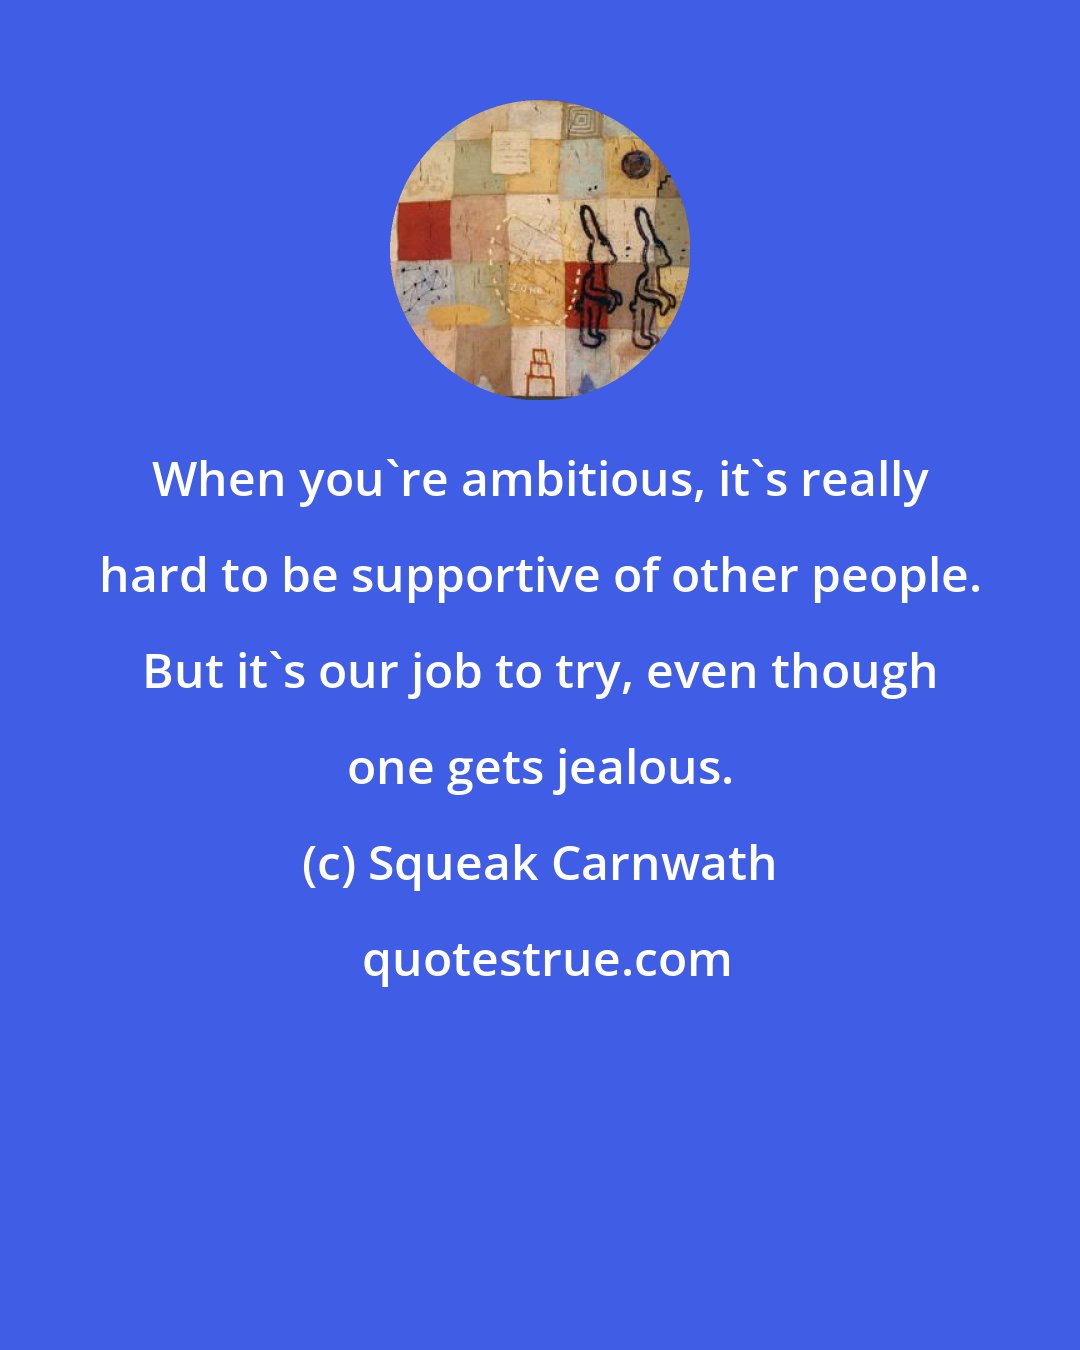 Squeak Carnwath: When you're ambitious, it's really hard to be supportive of other people. But it's our job to try, even though one gets jealous.